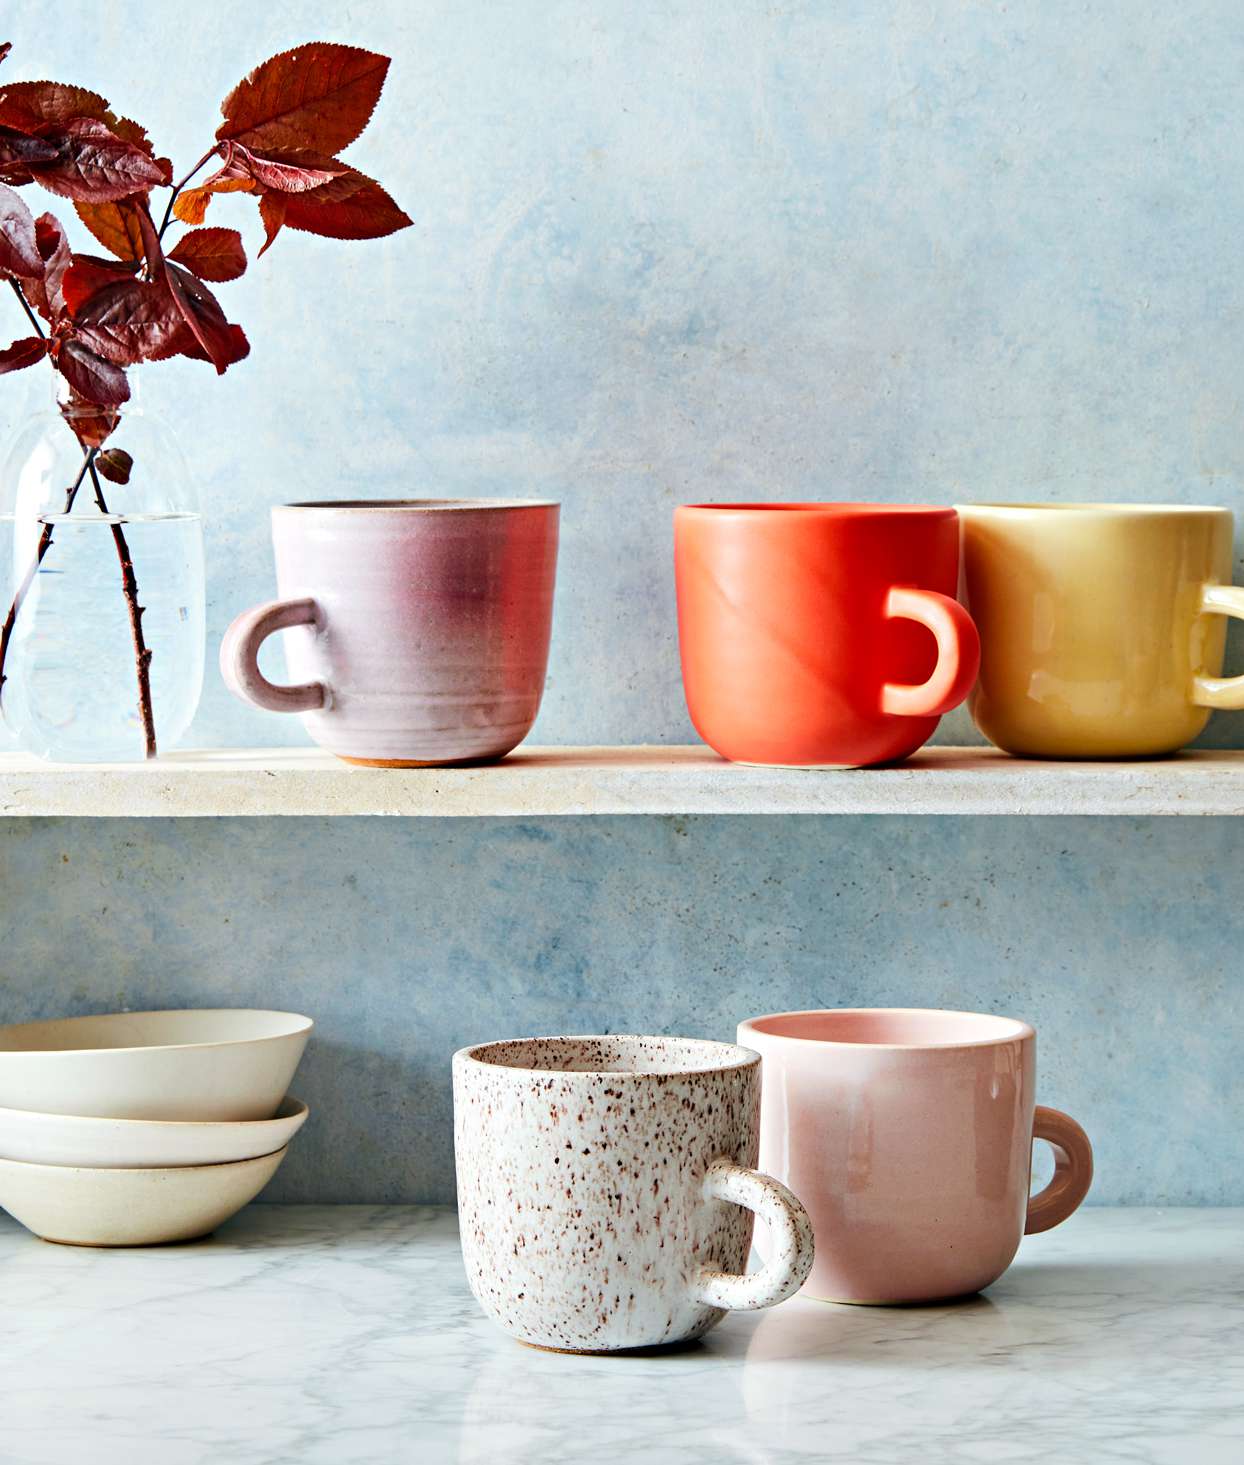 cups and bowls from Ank Ceramics based in Maine